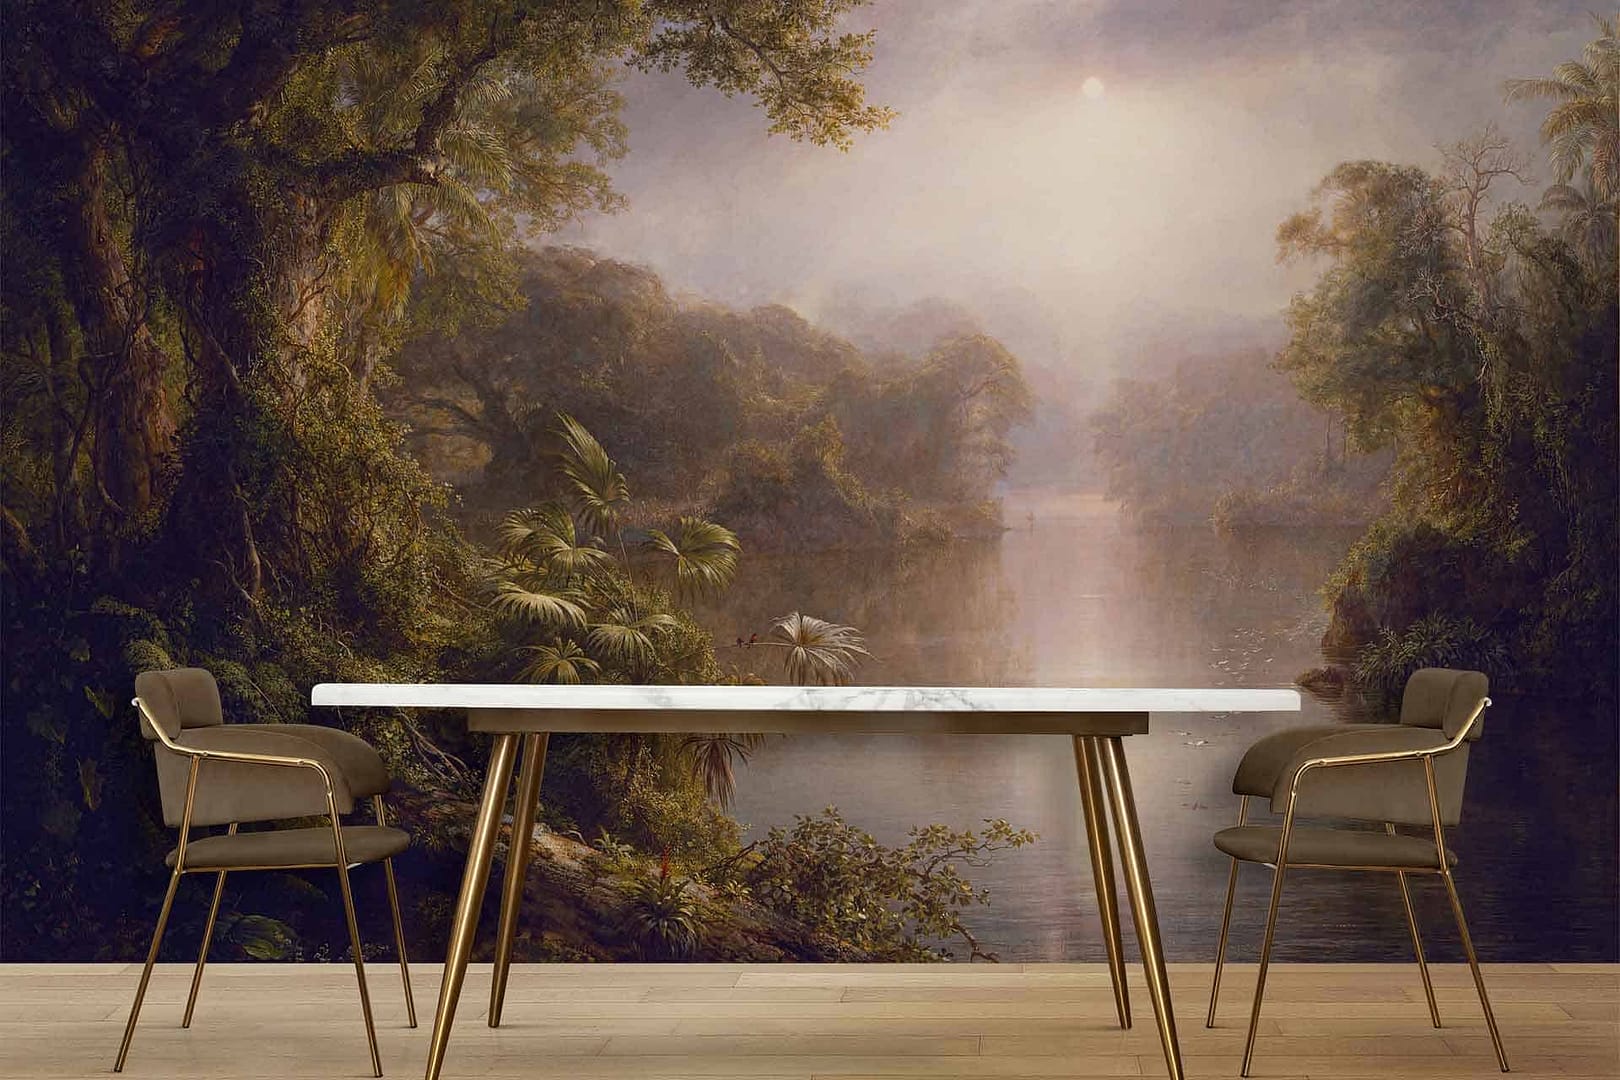 River Of Light - a wallpaper of a vintage landscape in dreamy tones by Cara Saven Wall Design